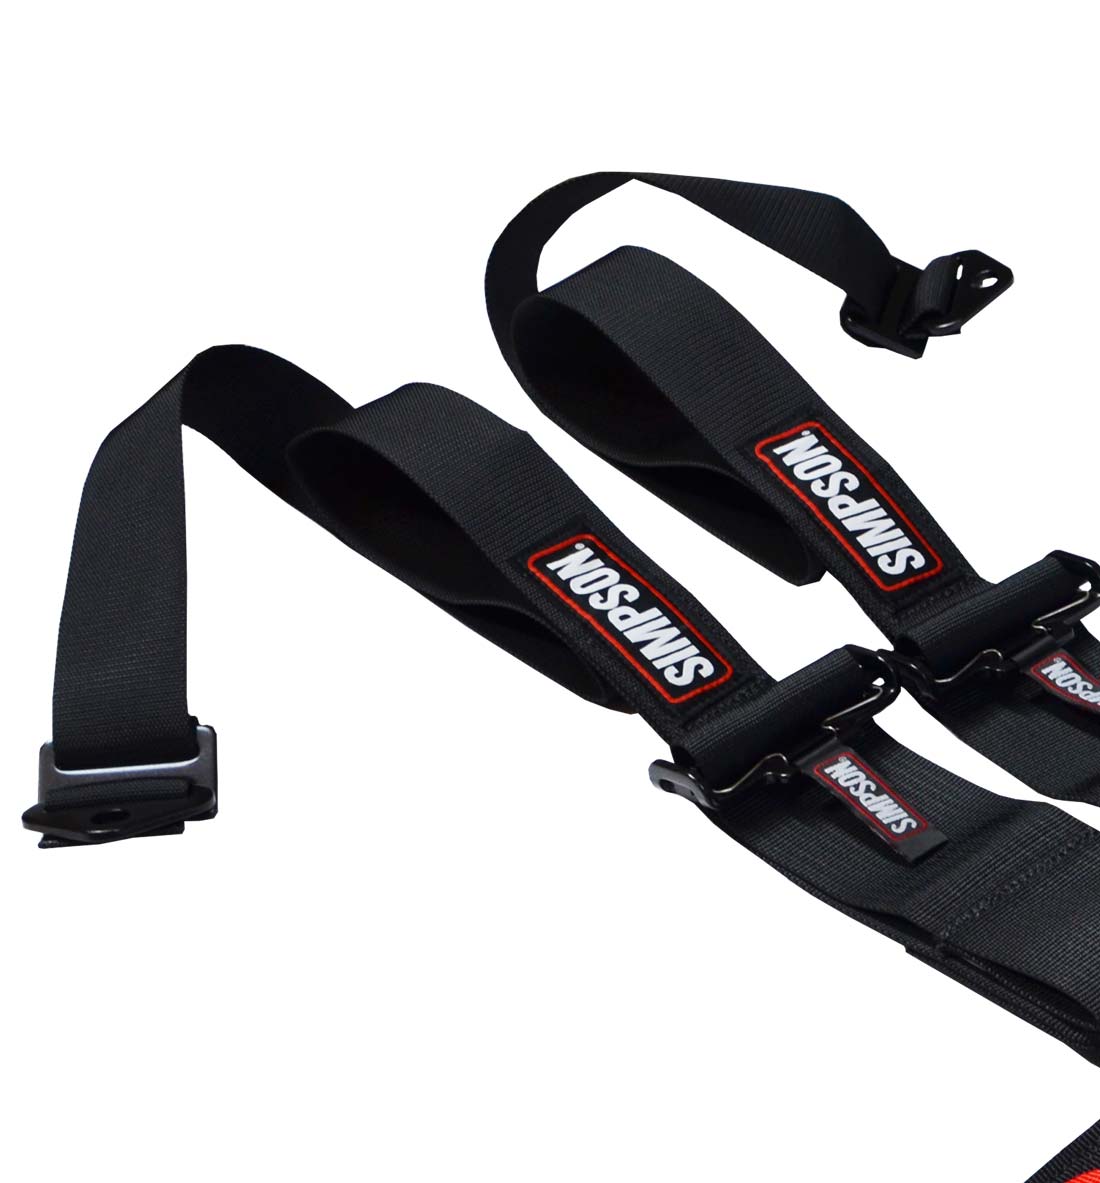 Simpson Racing 3" to 2" Latch & Link System Race Harness - Black